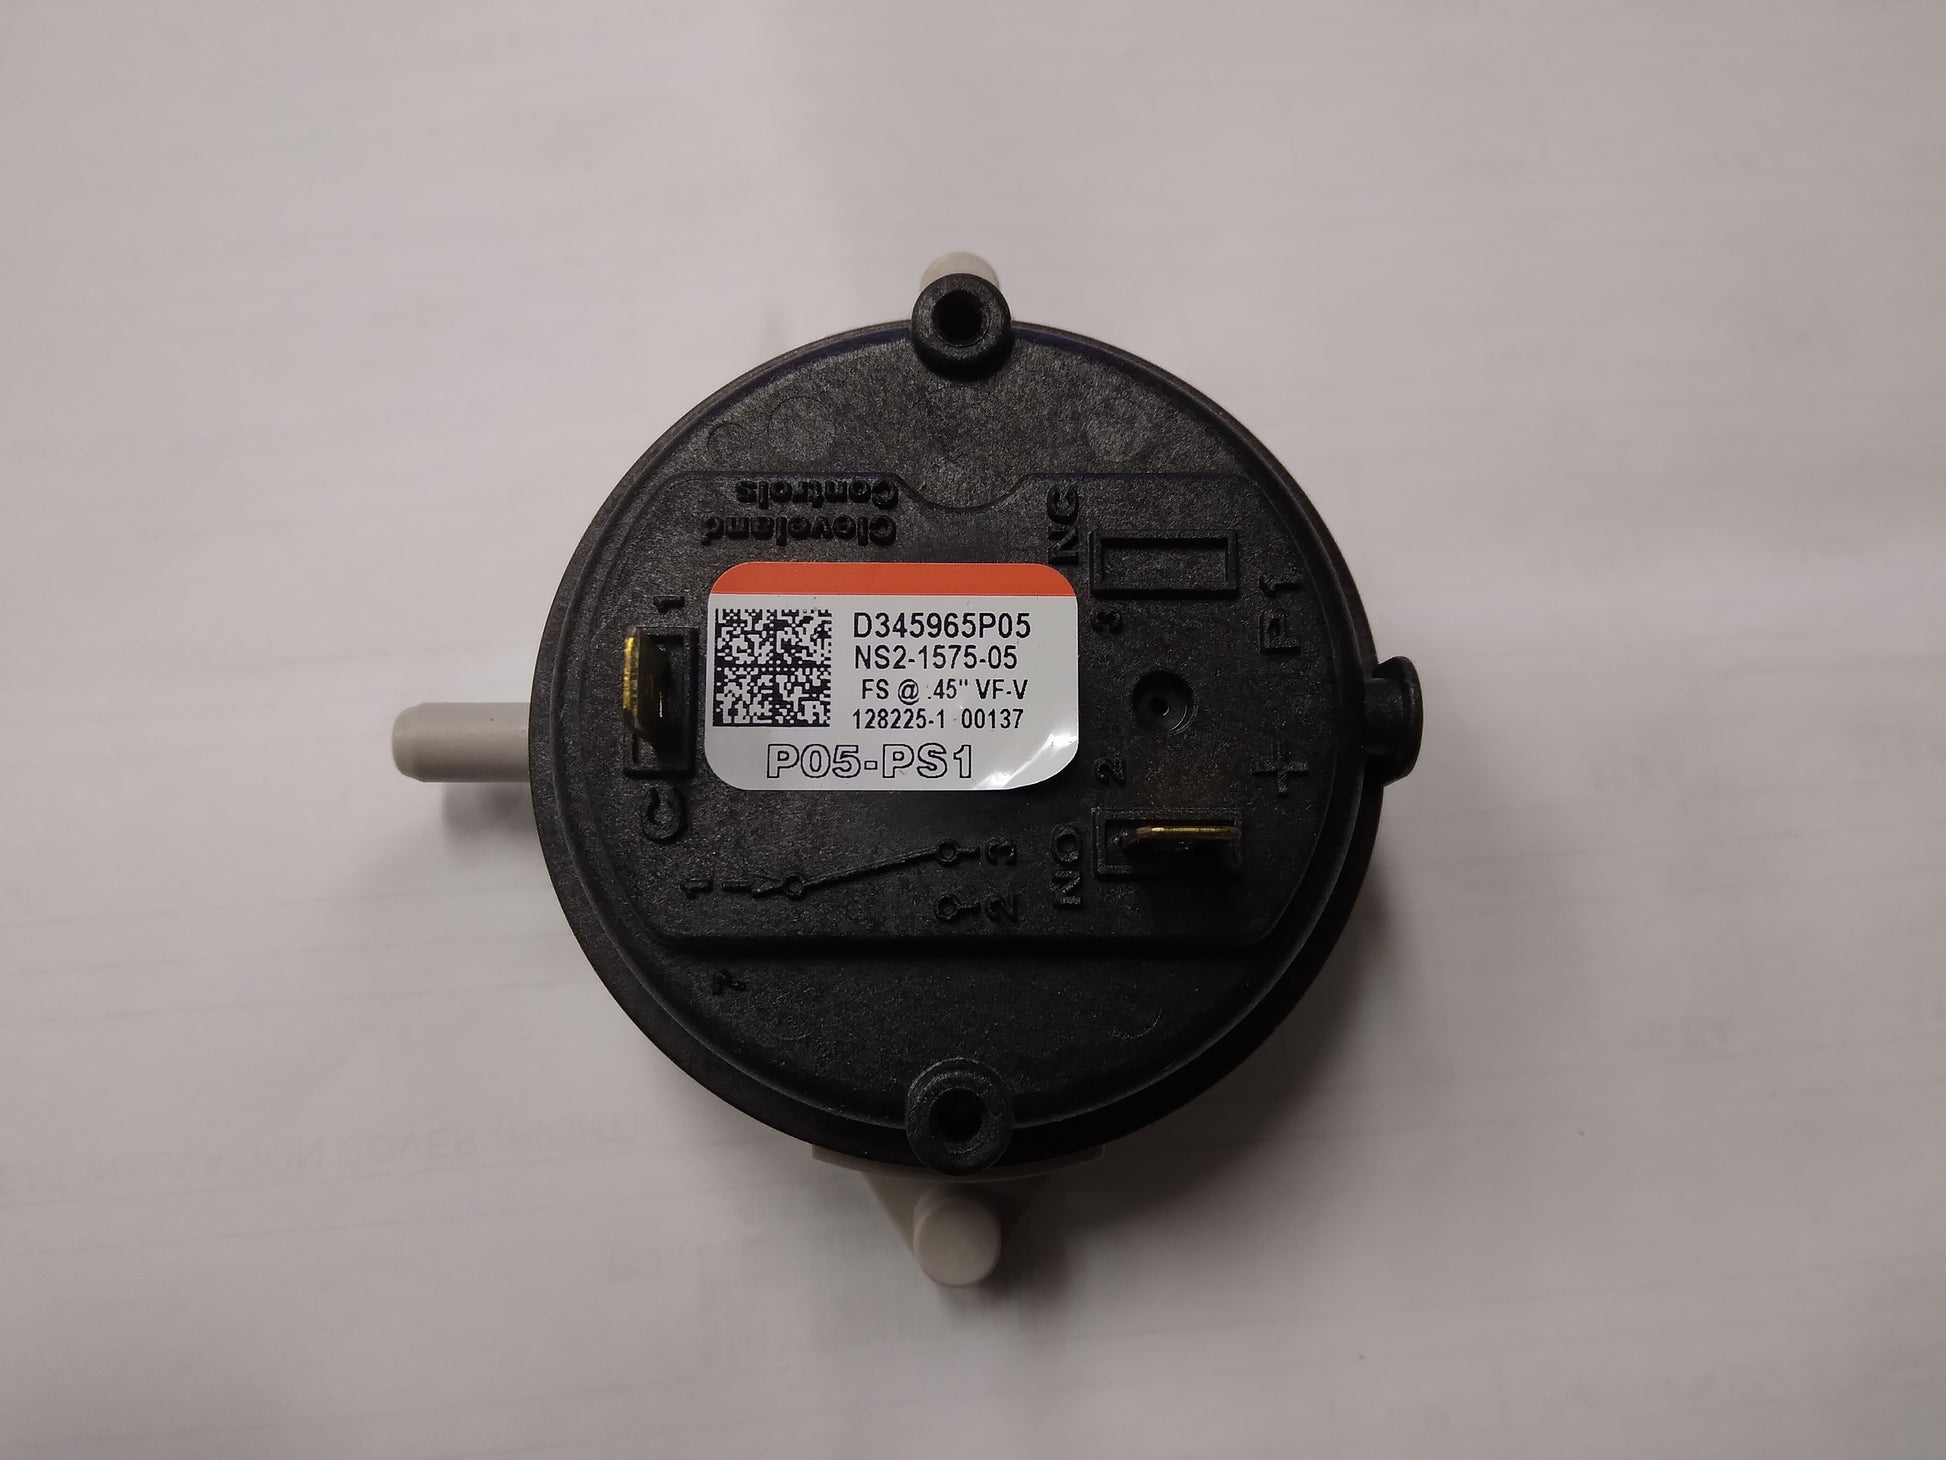 PRESSURE SWITCH .45"WC, 1-PORT, SPST, 28VA AT 24VAC, NORMALLY OPEN